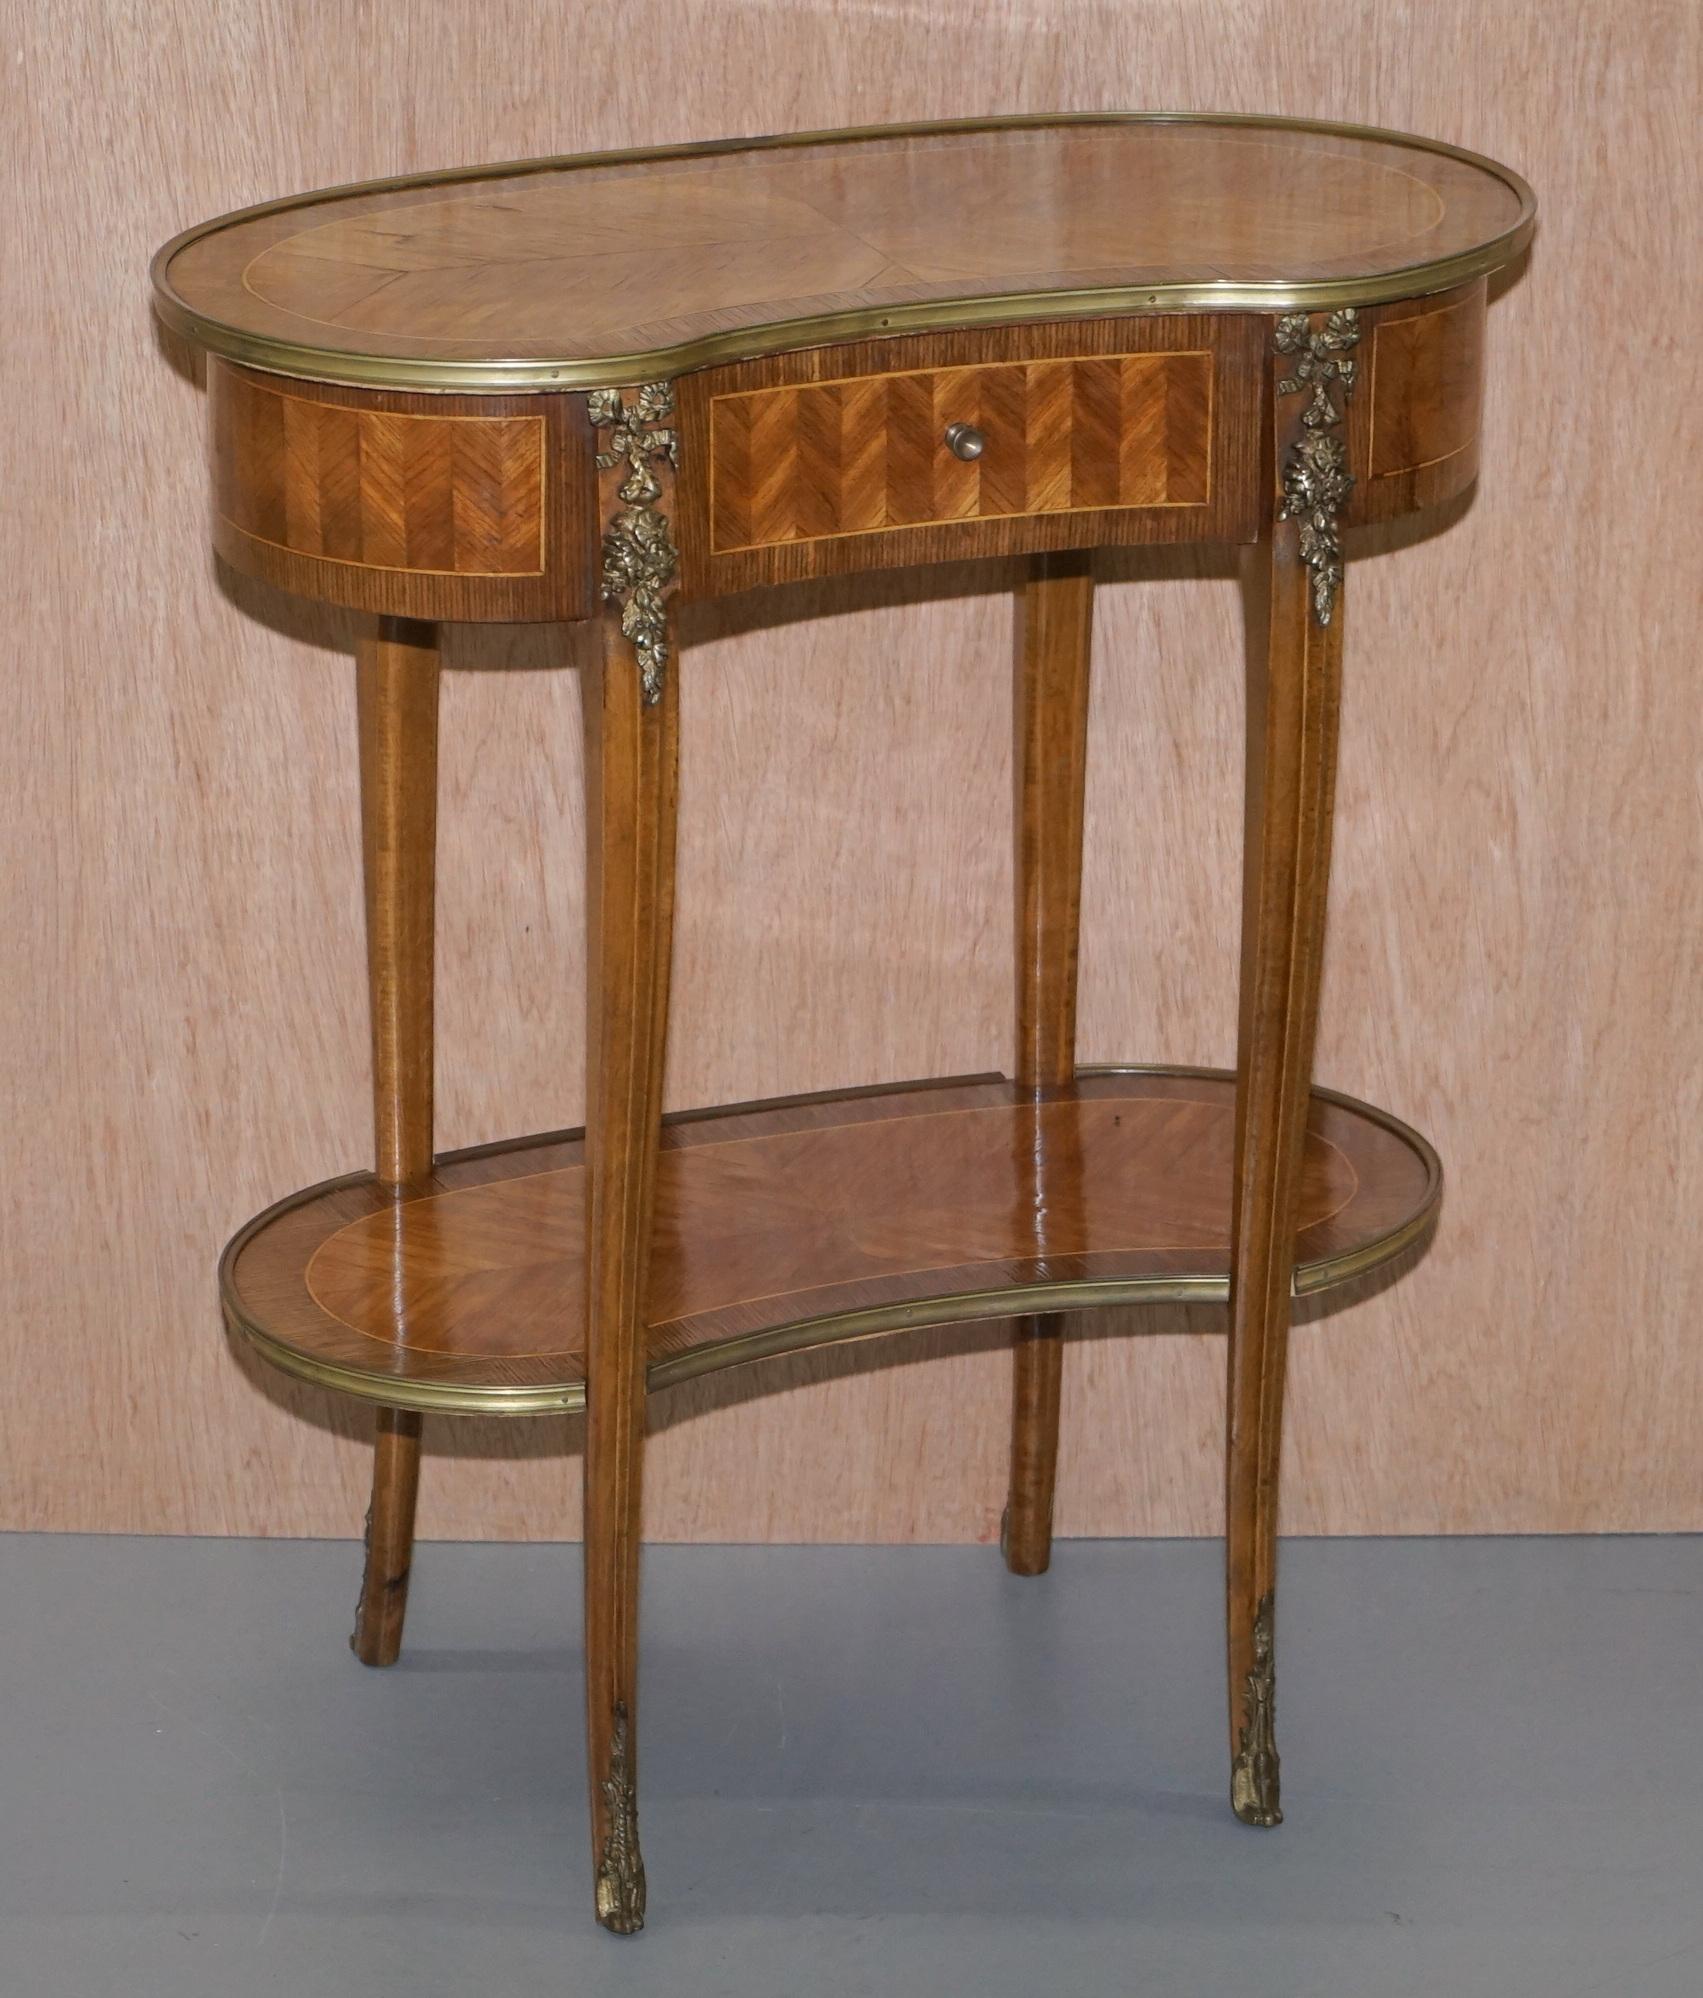 We are delighted to offer for sale this lovely pair of Louis XVI style kidney shaped side tables with bronzed fittings

A very good looking and well made pair, the fixtures and fittings are all bronzed, the tables are inlaid with mahogany and